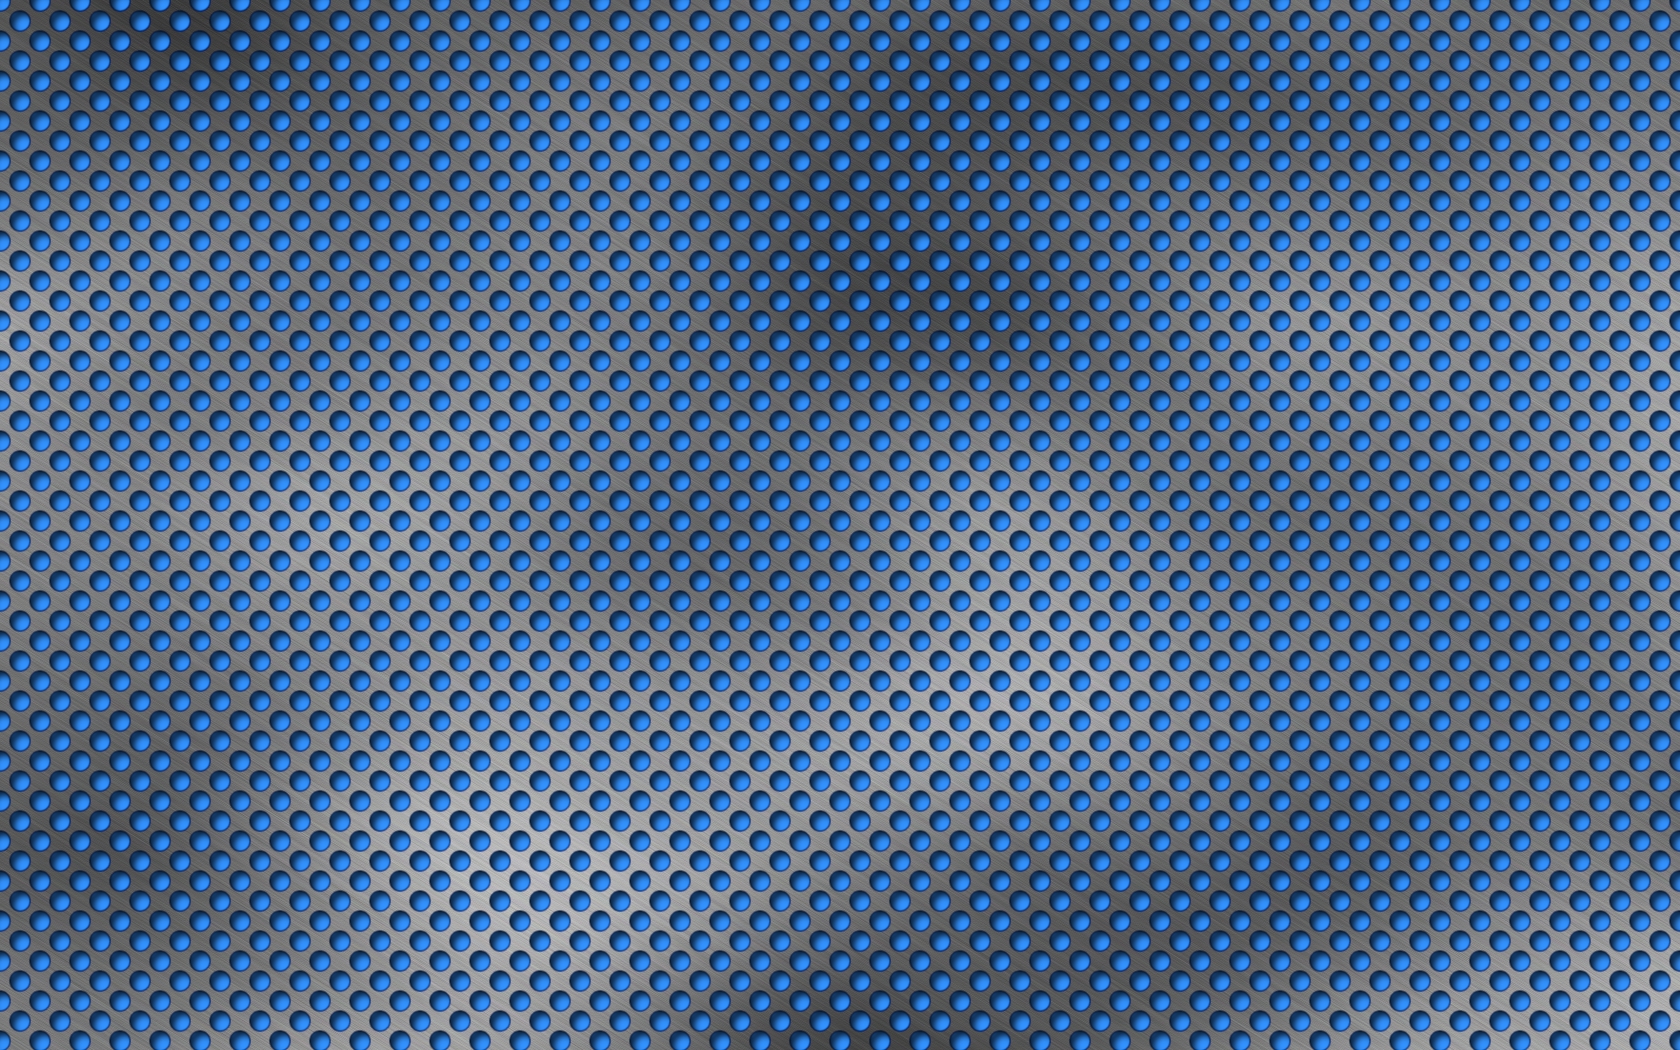 Blue Metal Grid by Bubba77 on